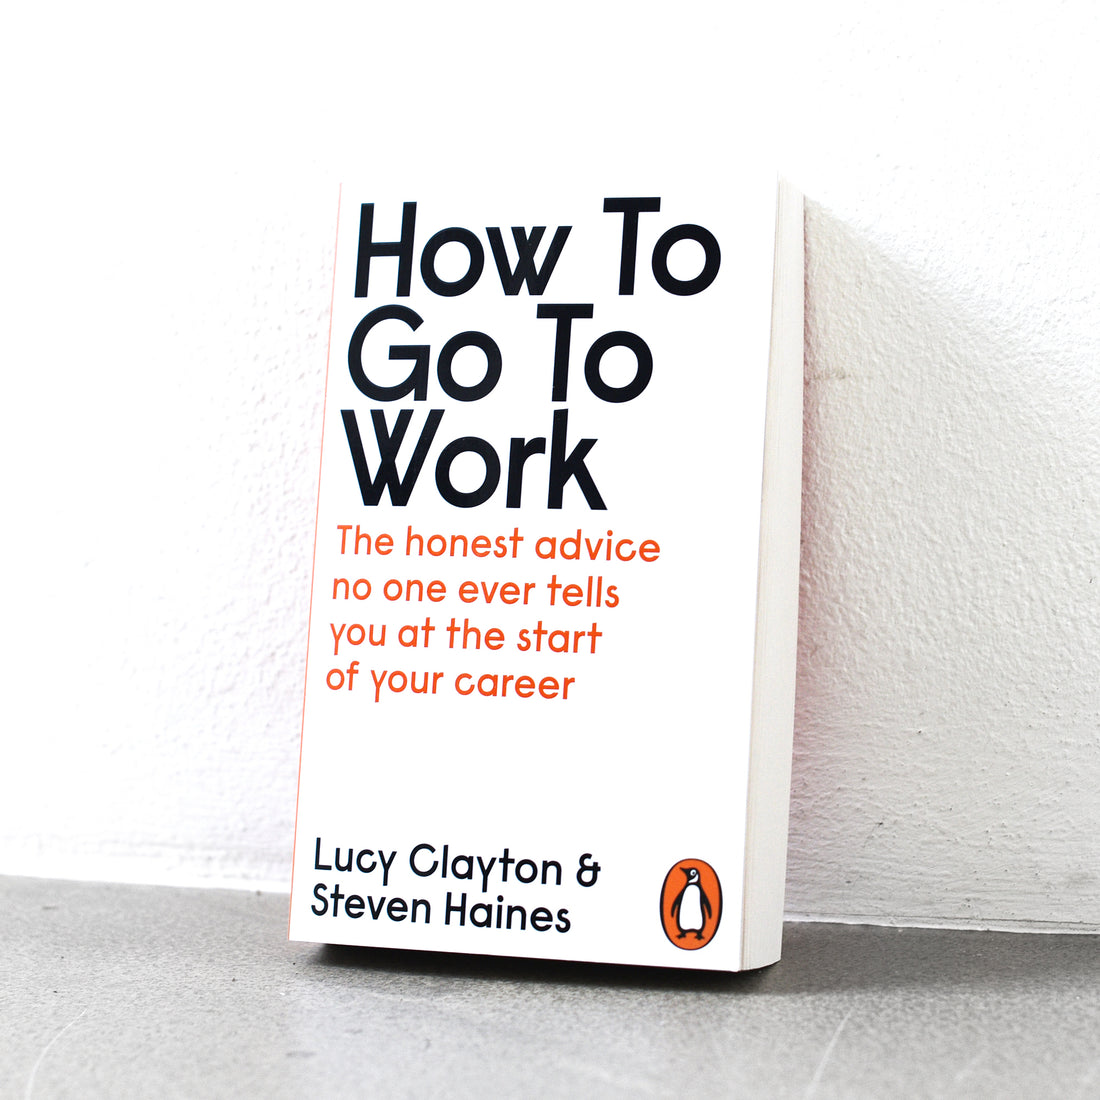 How to Go to Work: The Honest Advice No One Ever Tells You at The Start of Your Career - Lucy Clayton & Steven Haines